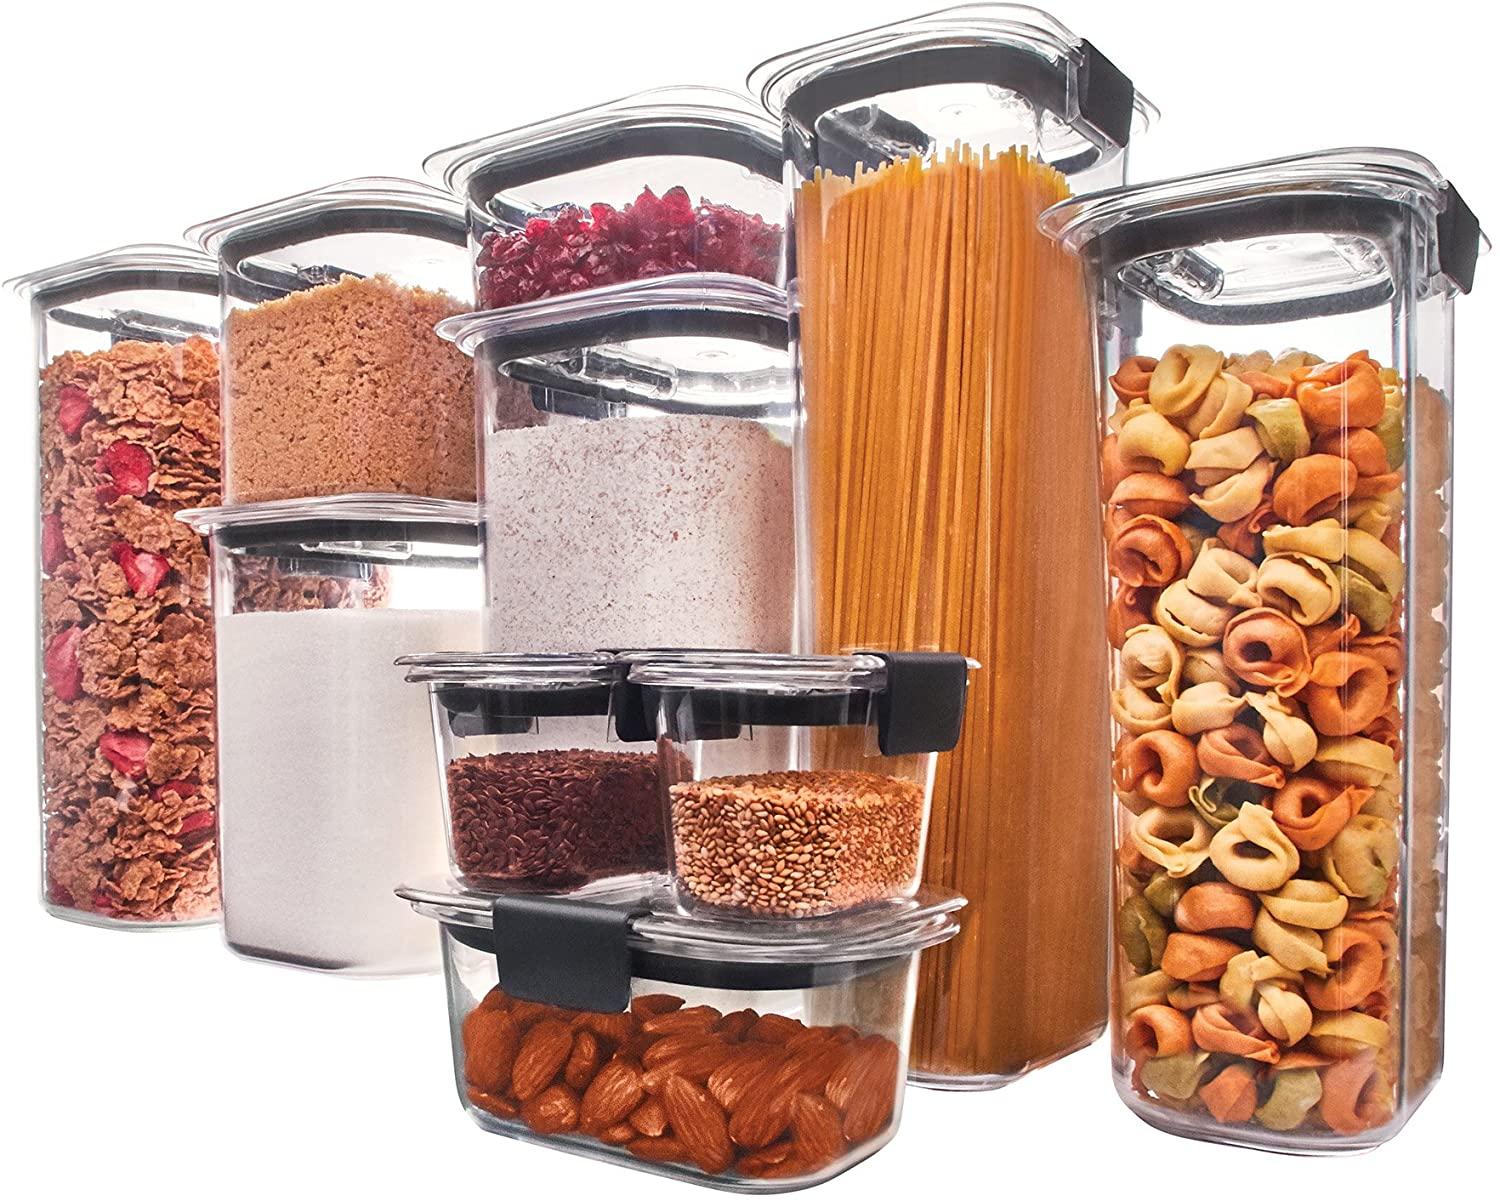 Rubbermaid Brilliance Pantry Airtight Food Storage Containers for $41.94 Shipped